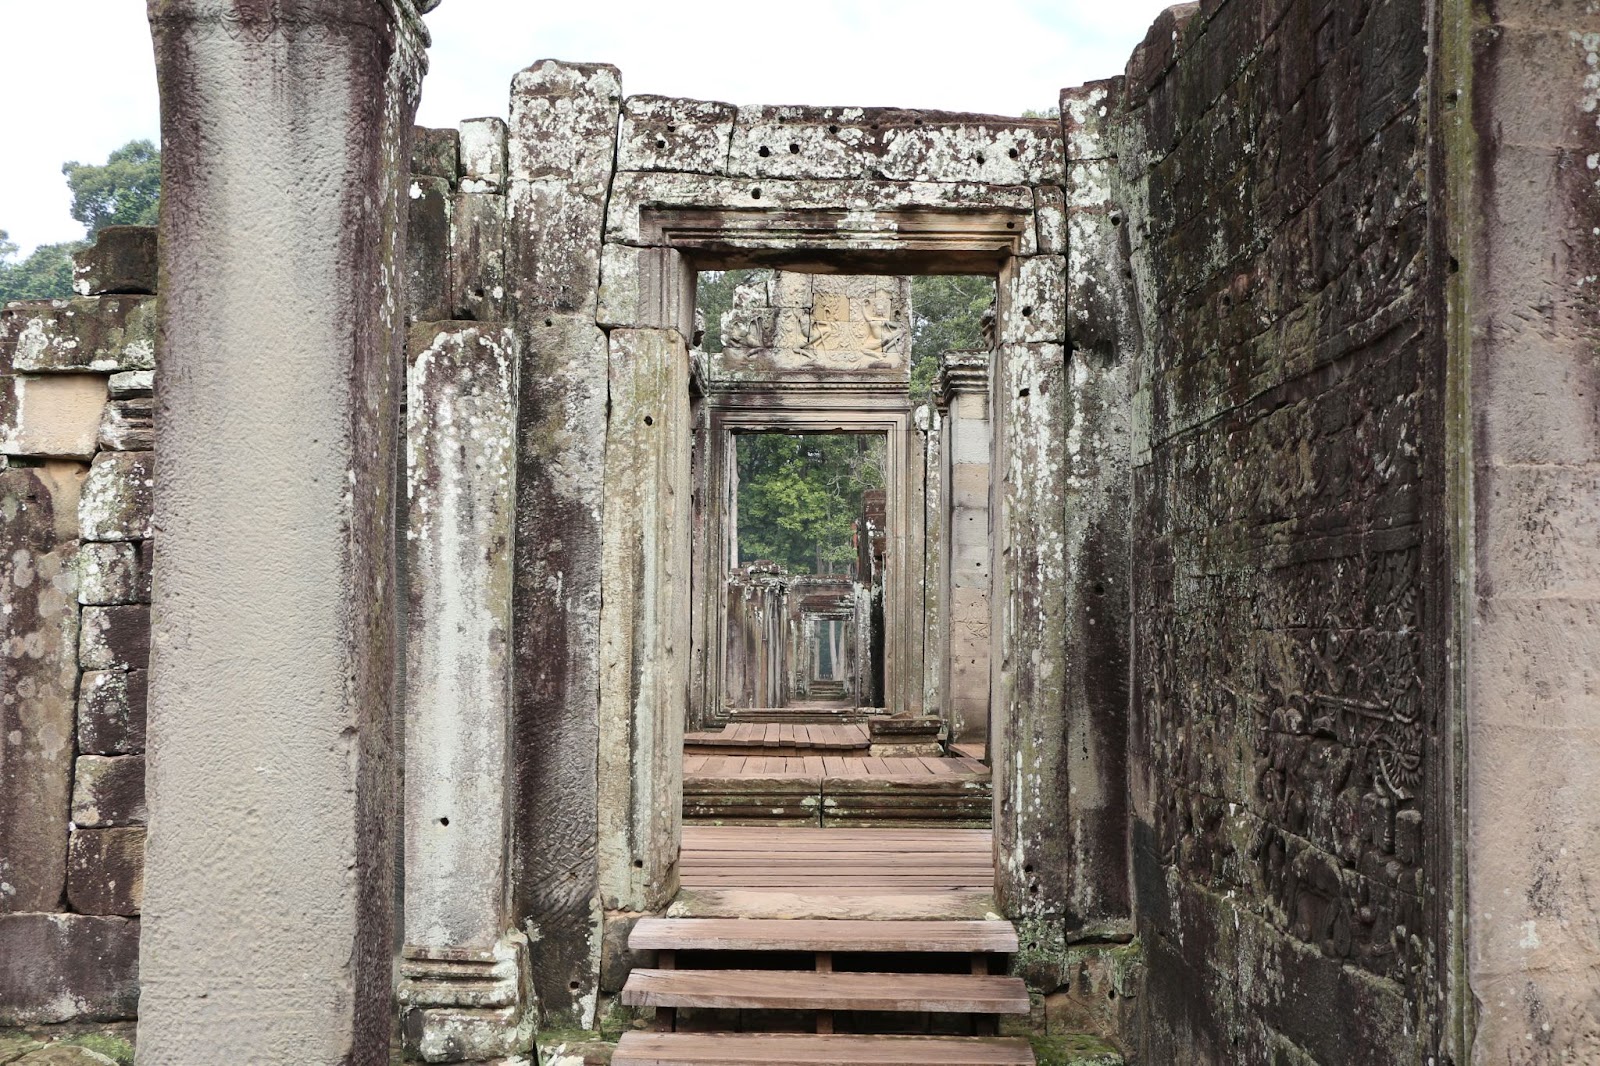 3 days in Siem Reap. This is one of the long passageways at Bayon.